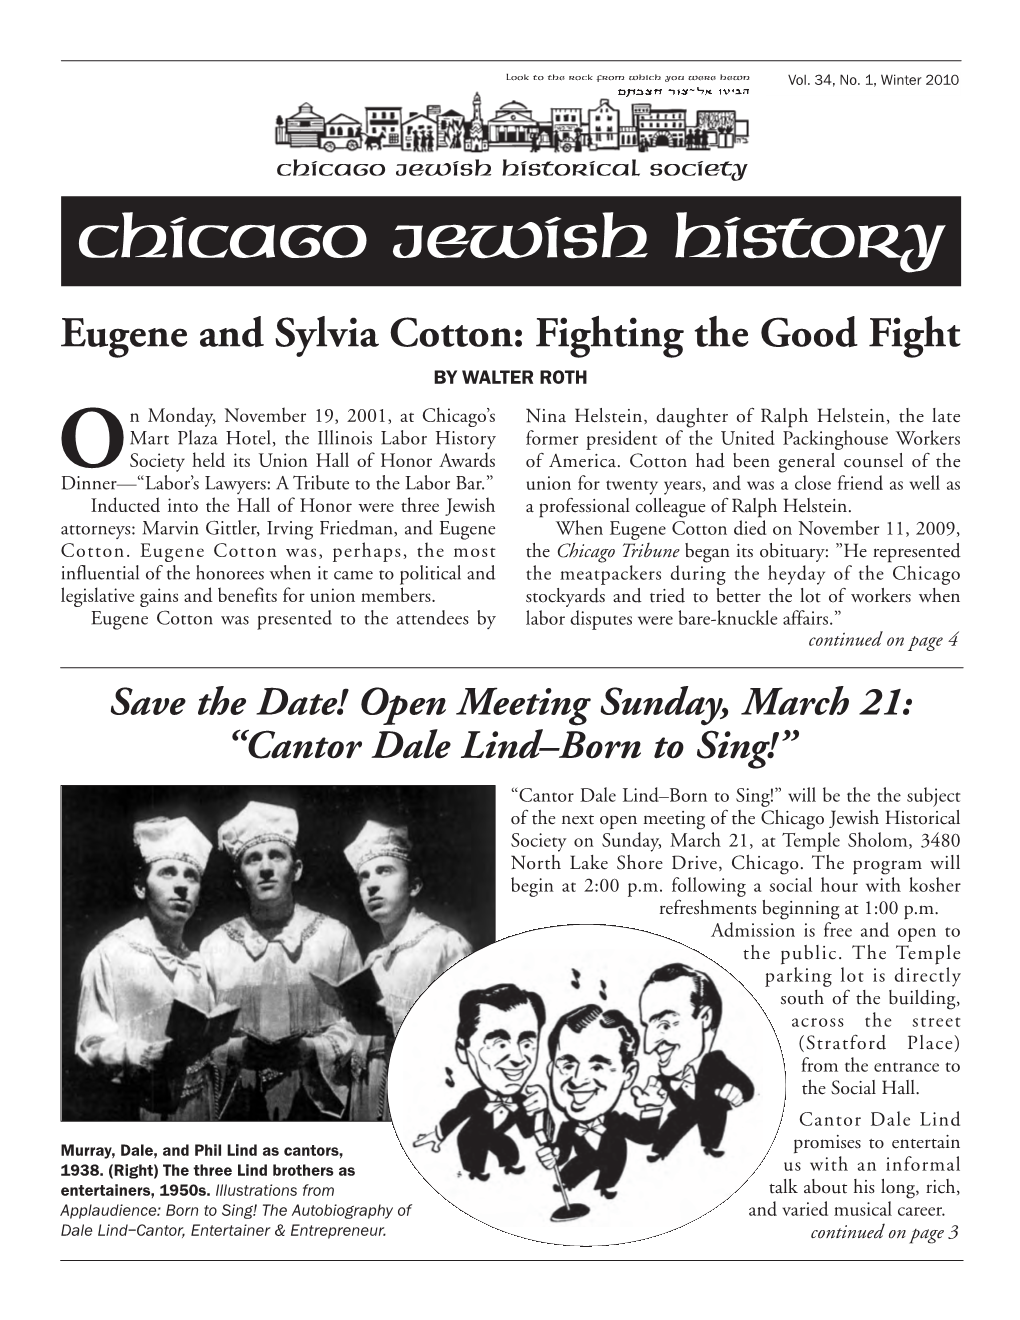 Chicago Jewish History Eugene and Sylvia Cotton: Fighting the Good Fight by WALTER ROTH